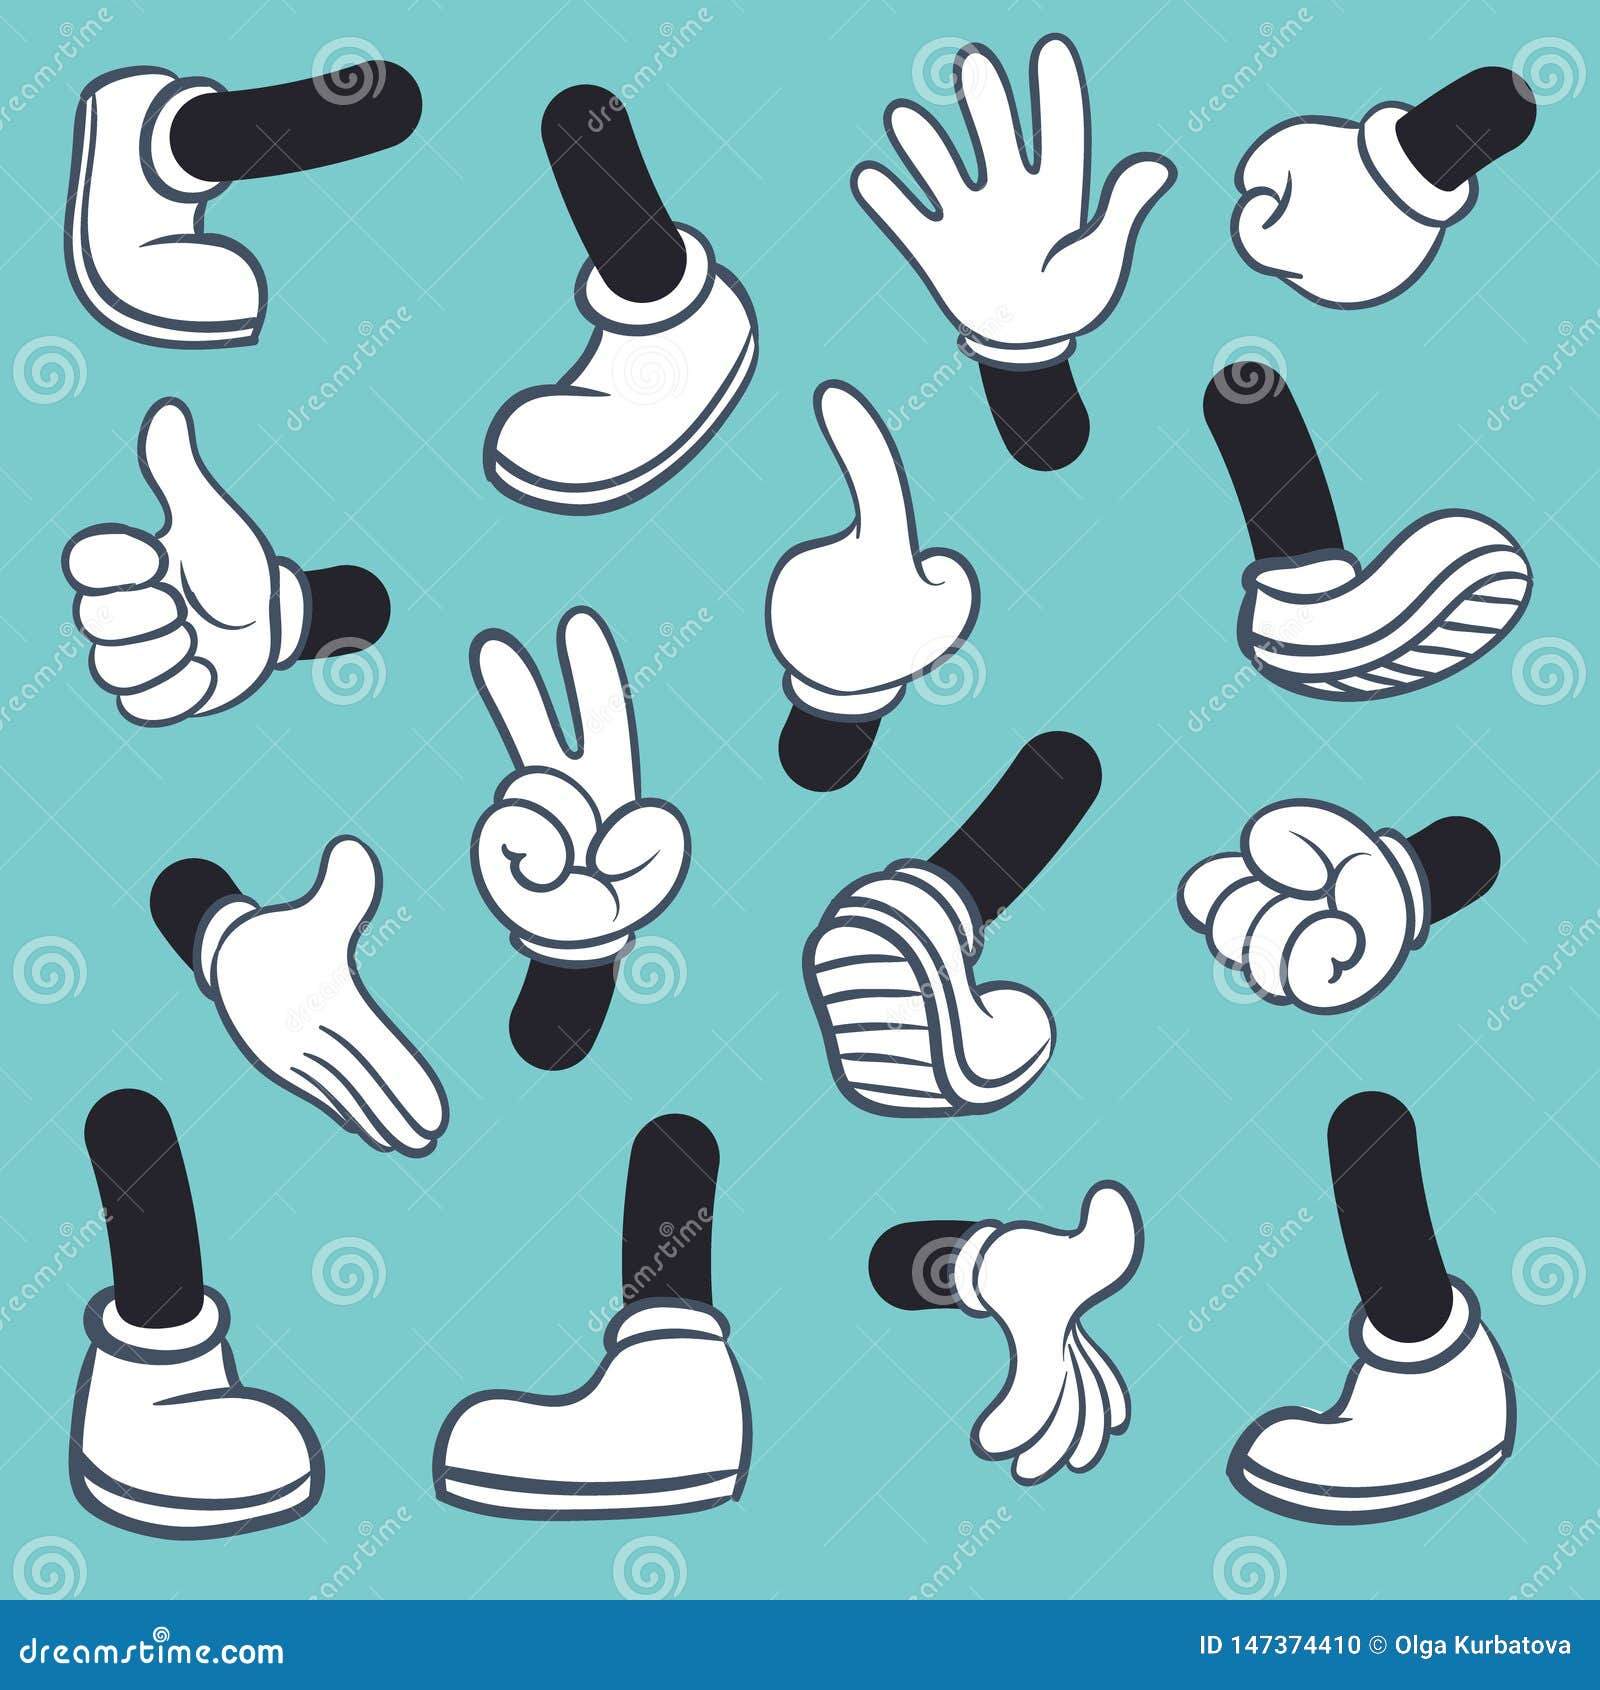 cartoon legs hands. leg in boots and gloved hand, gestures parts body comic feet in shoes different poses. 